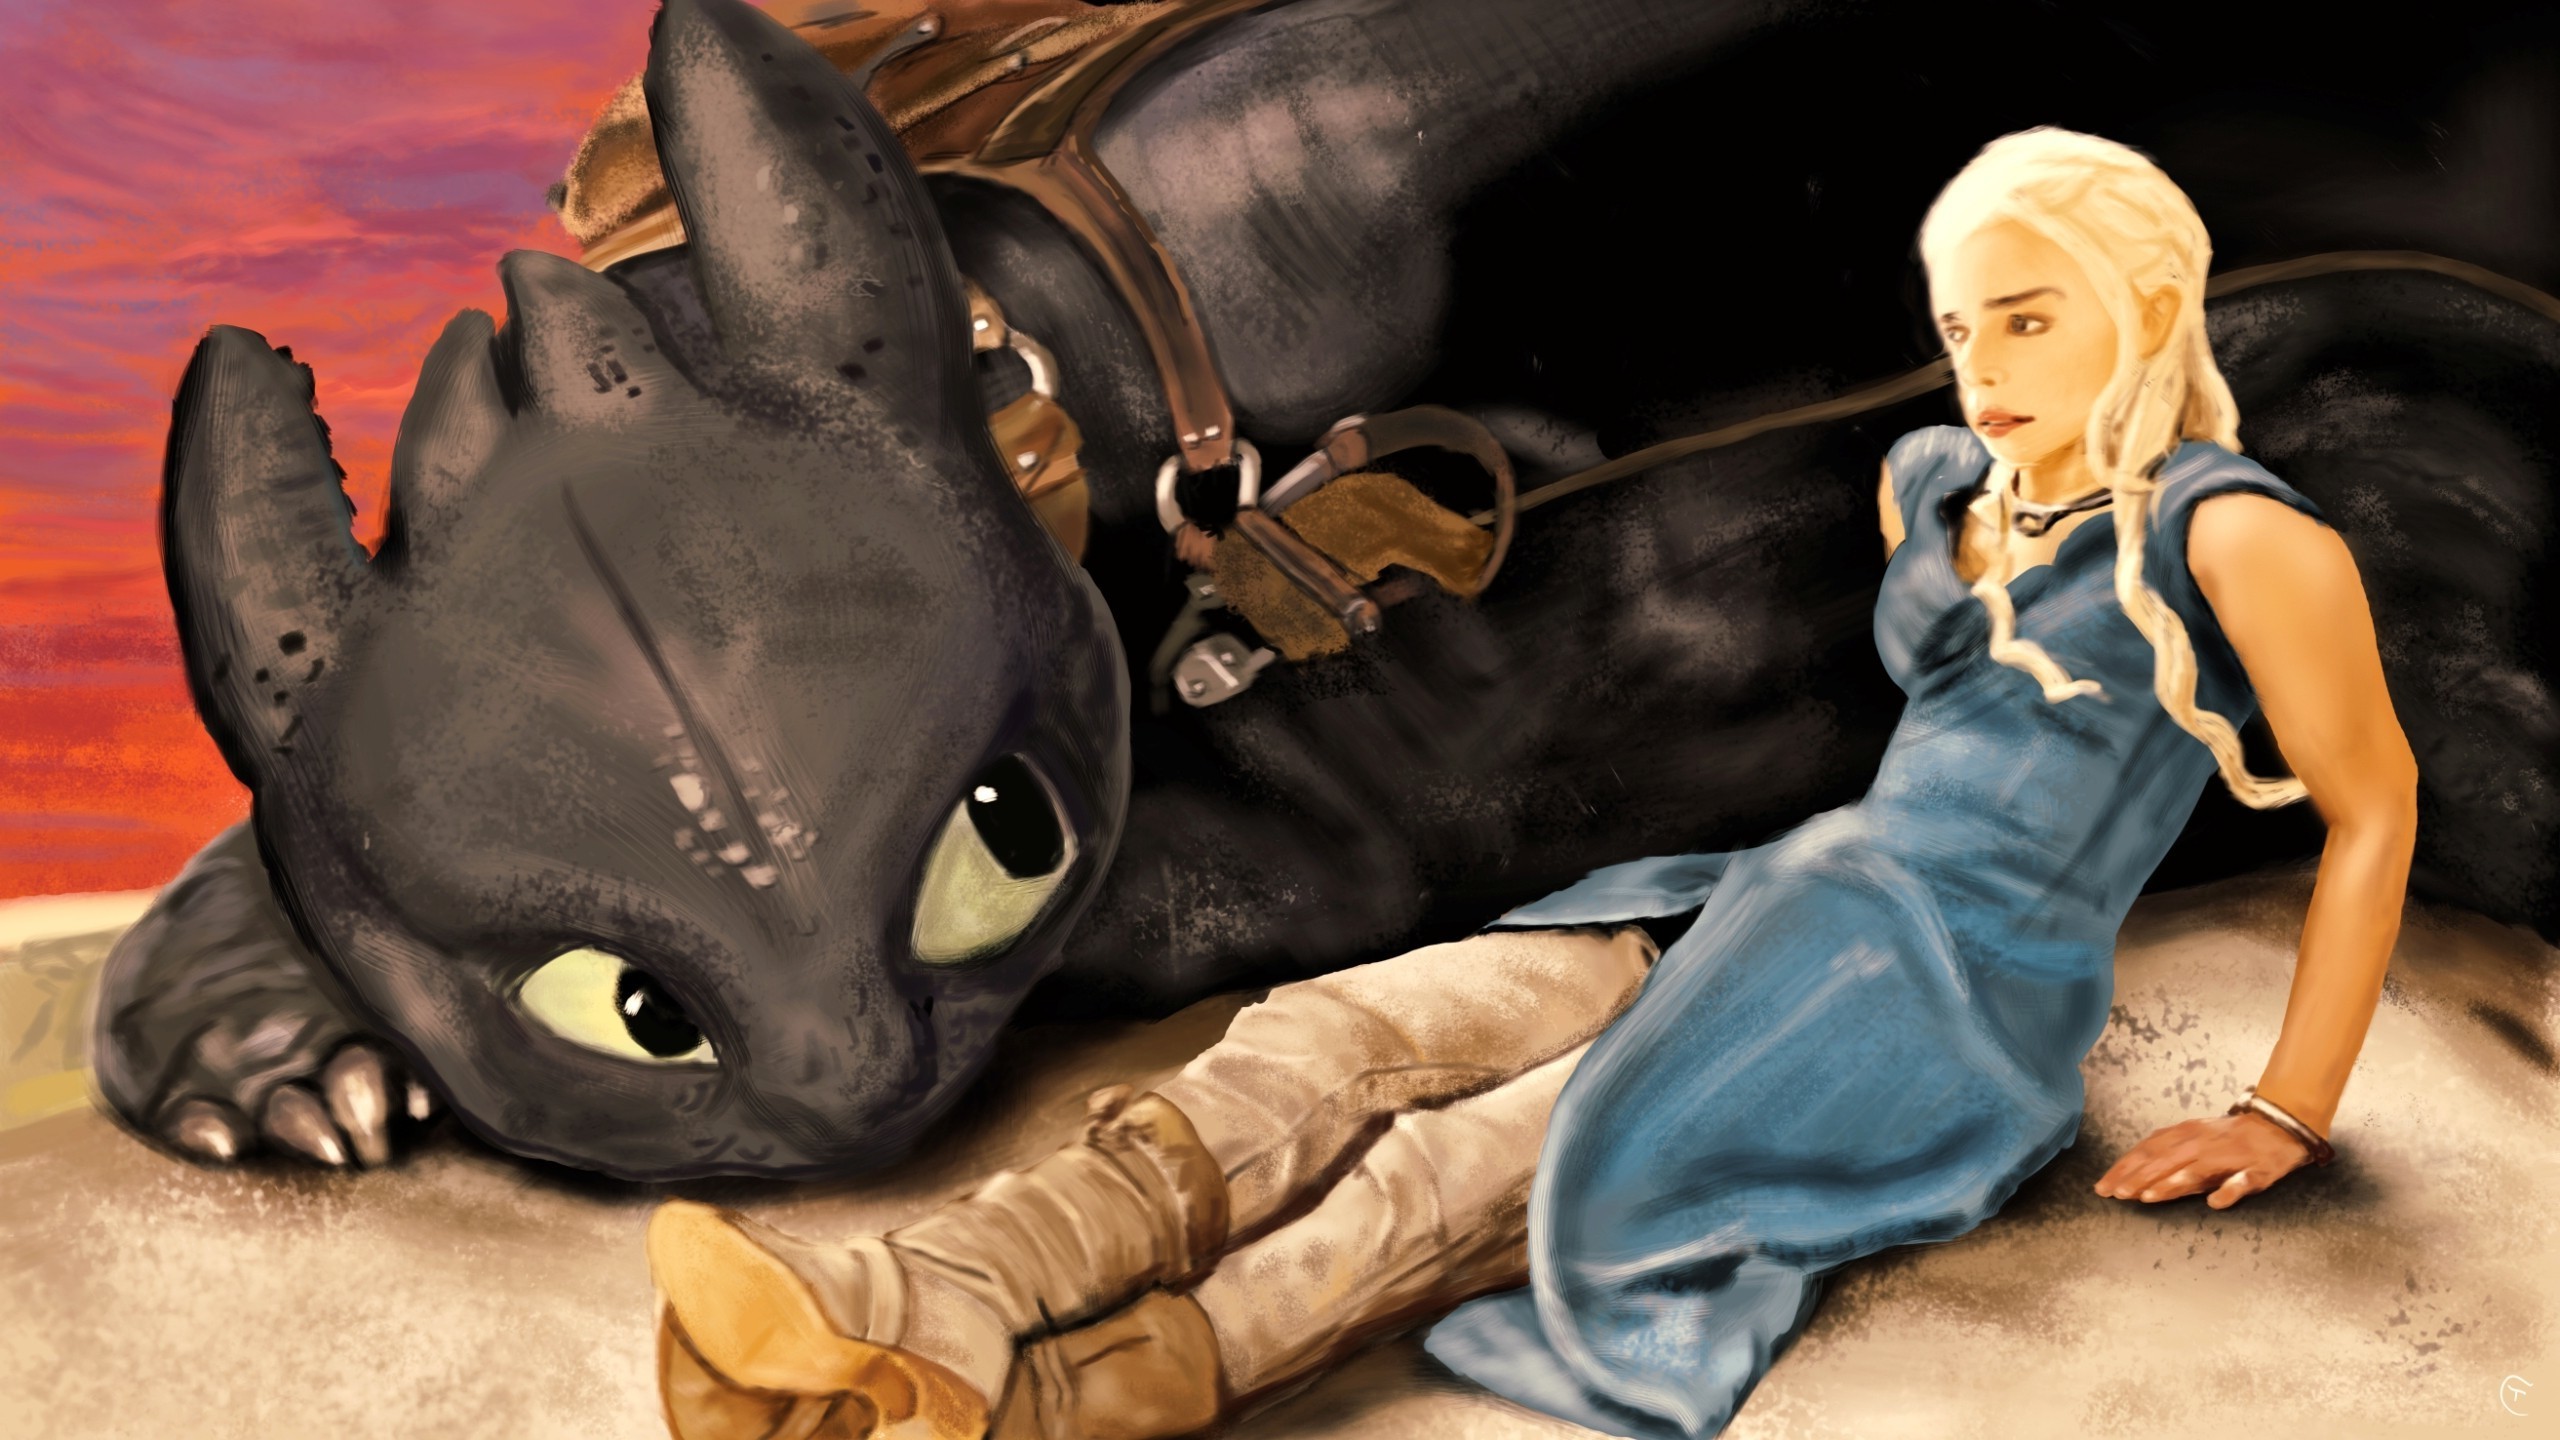 Daenerys Targaryen Game Of Thrones How To Train Your Dragon Fan Art Toothless Wallpapers Hd Desktop And Mobile Backgrounds 2560x1440